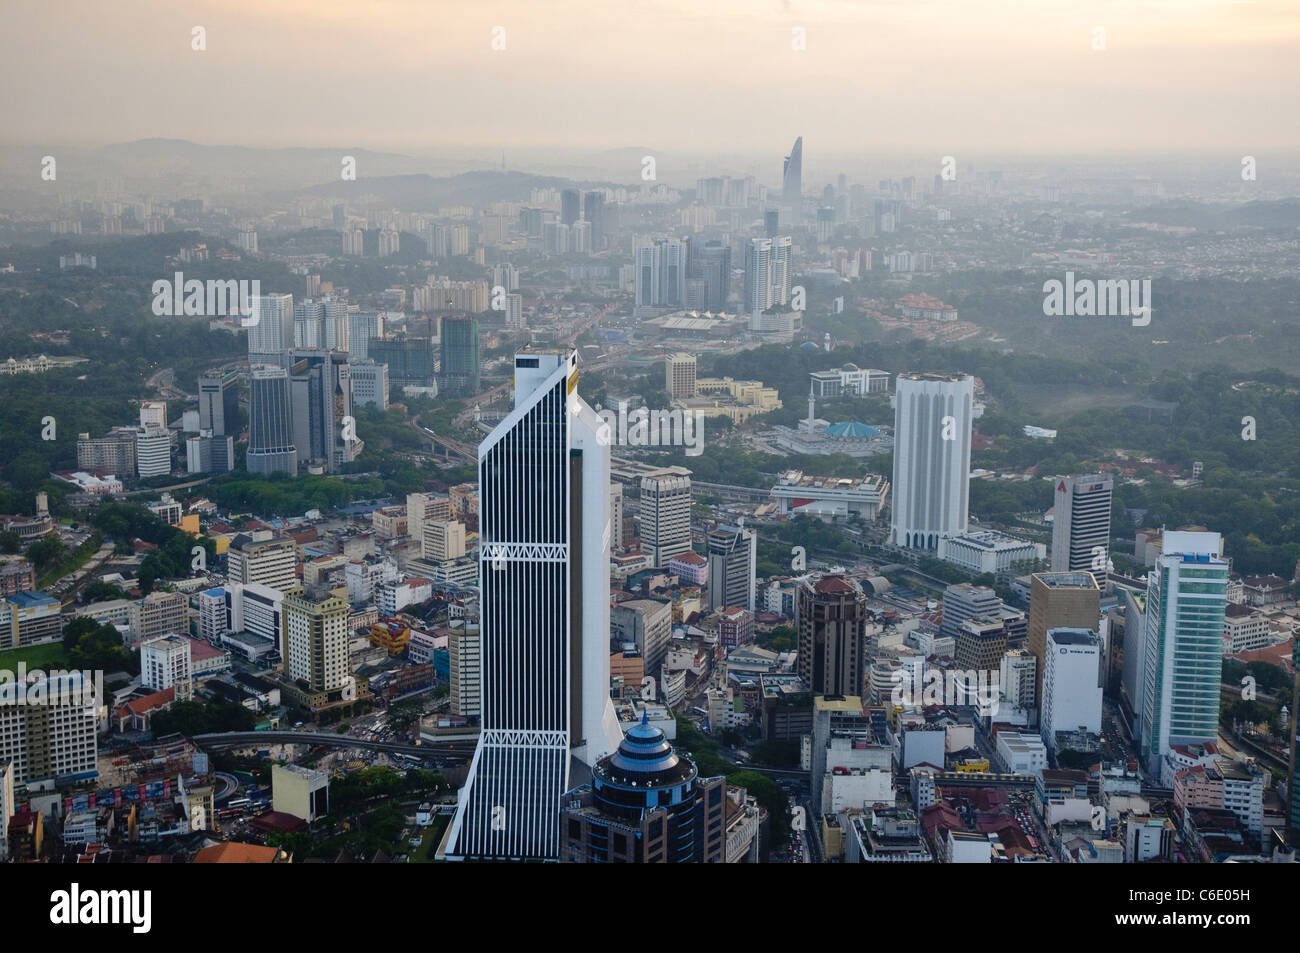 View from Menara TV Tower, the fourth largest telecommunications tower in the world, Kuala Lumpur, Malaysia, Southeast Asia Stock Photo